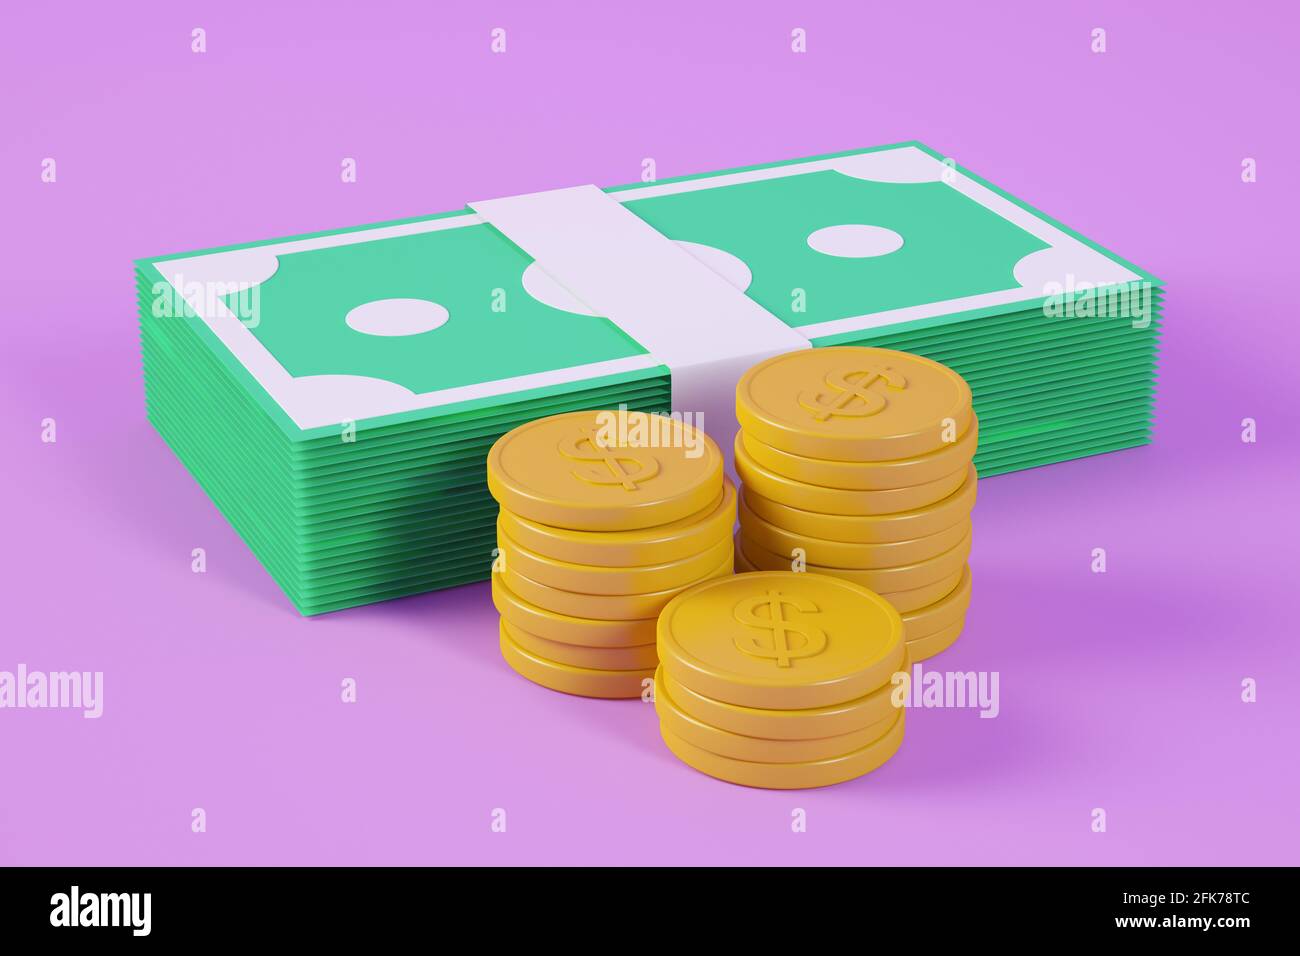 Bids and coins on purple background Stock Photo